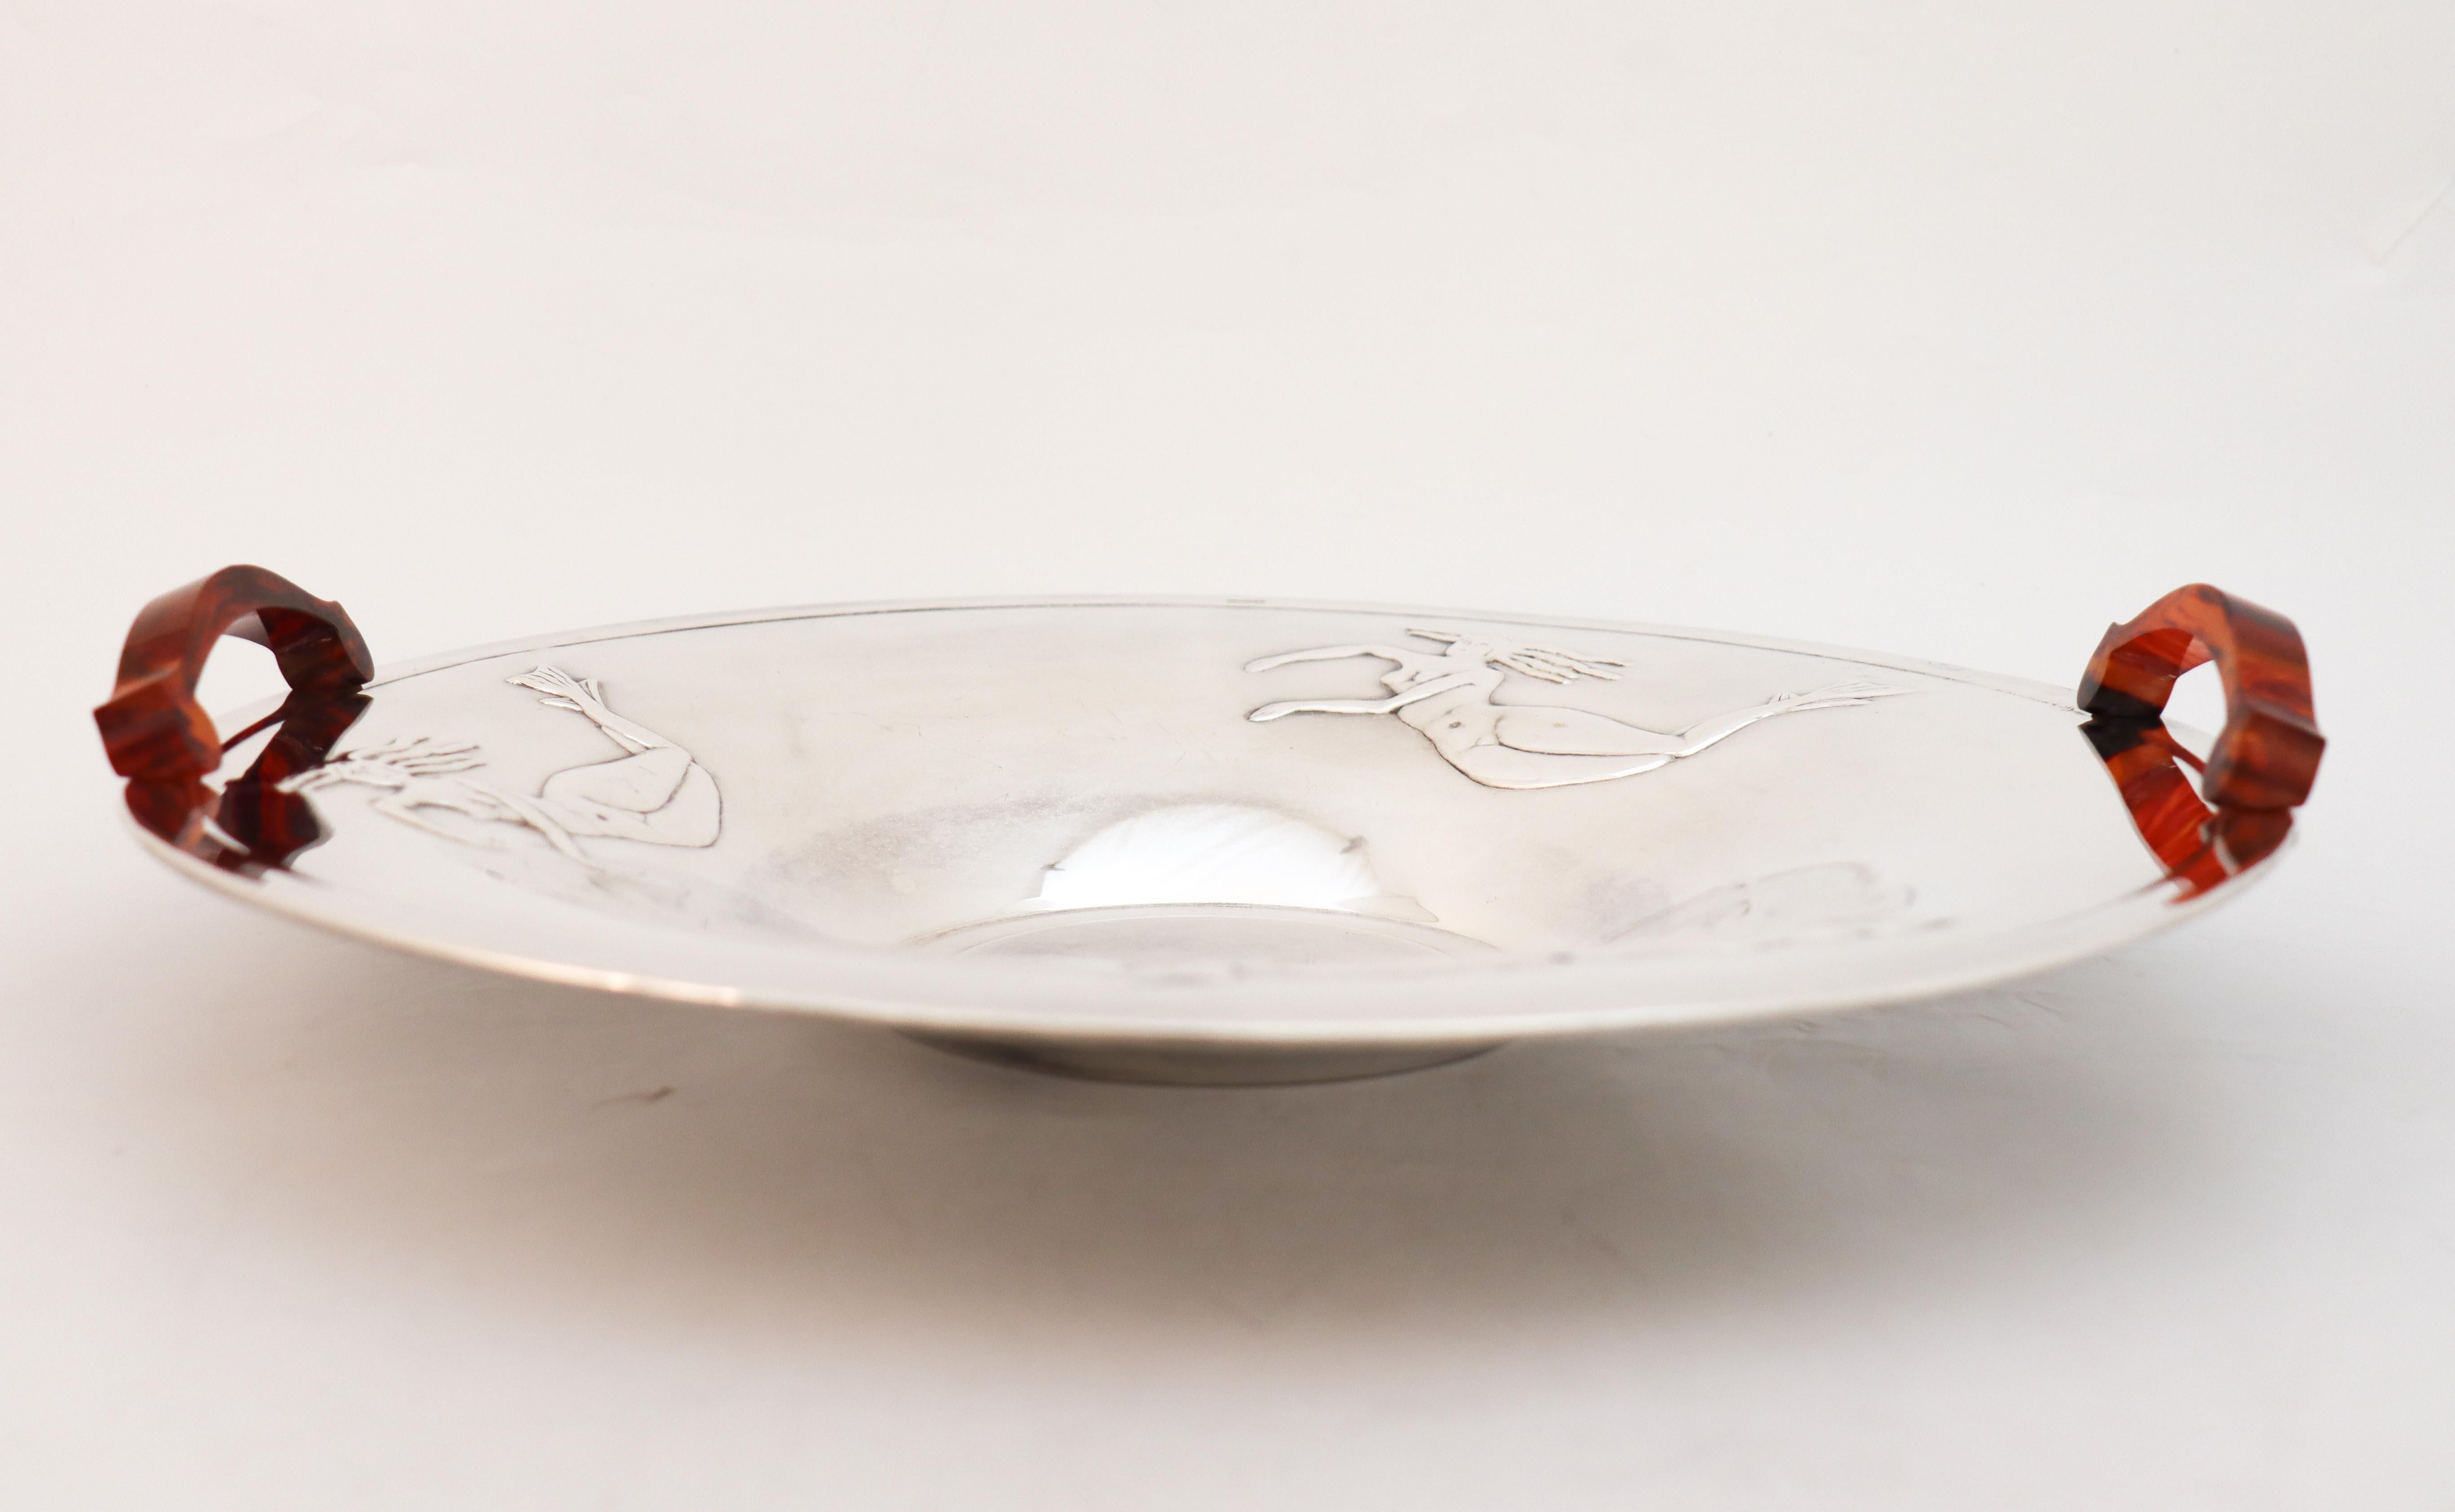 20th Century Silver Plated Bowl - Art Deco / Swedish Modern 1930-1940s - Mermaids For Sale